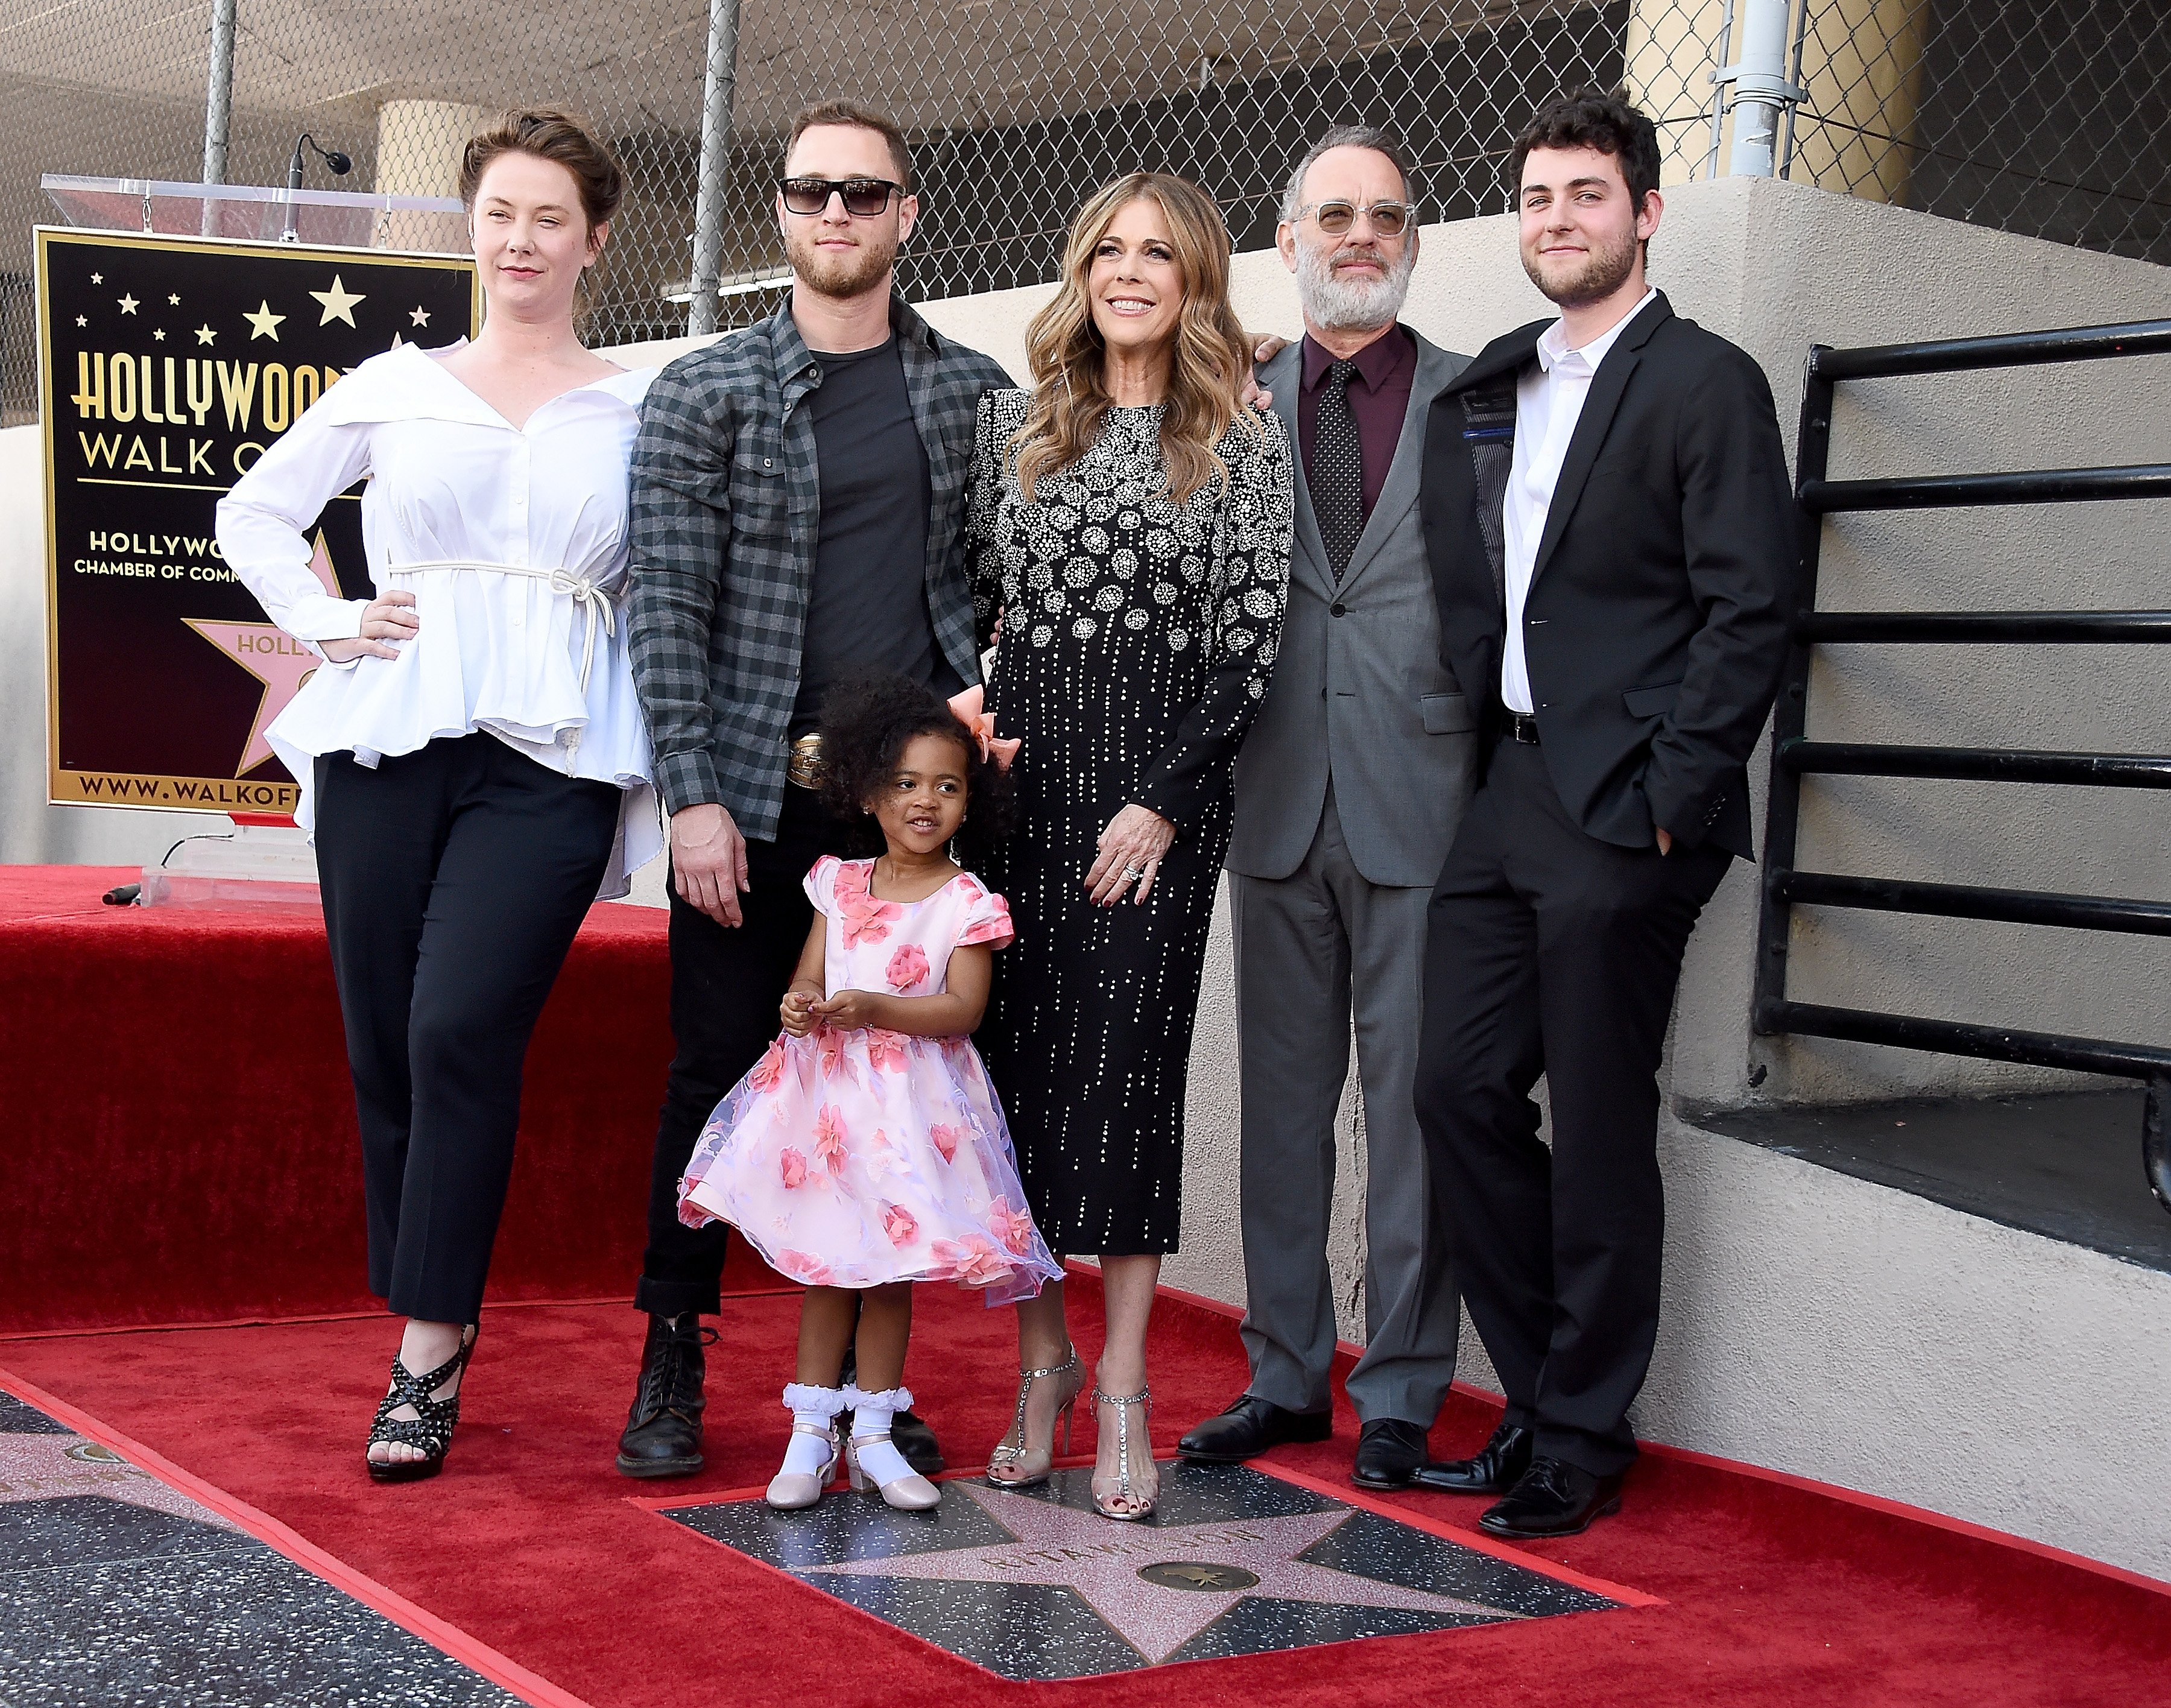 Rita Wilson and Tom Hanks pose with their family as Rita is honored with a star on the Hollywood Walk Of Fame on March 29, 2019 in Hollywood, California. | Source: Getty Images